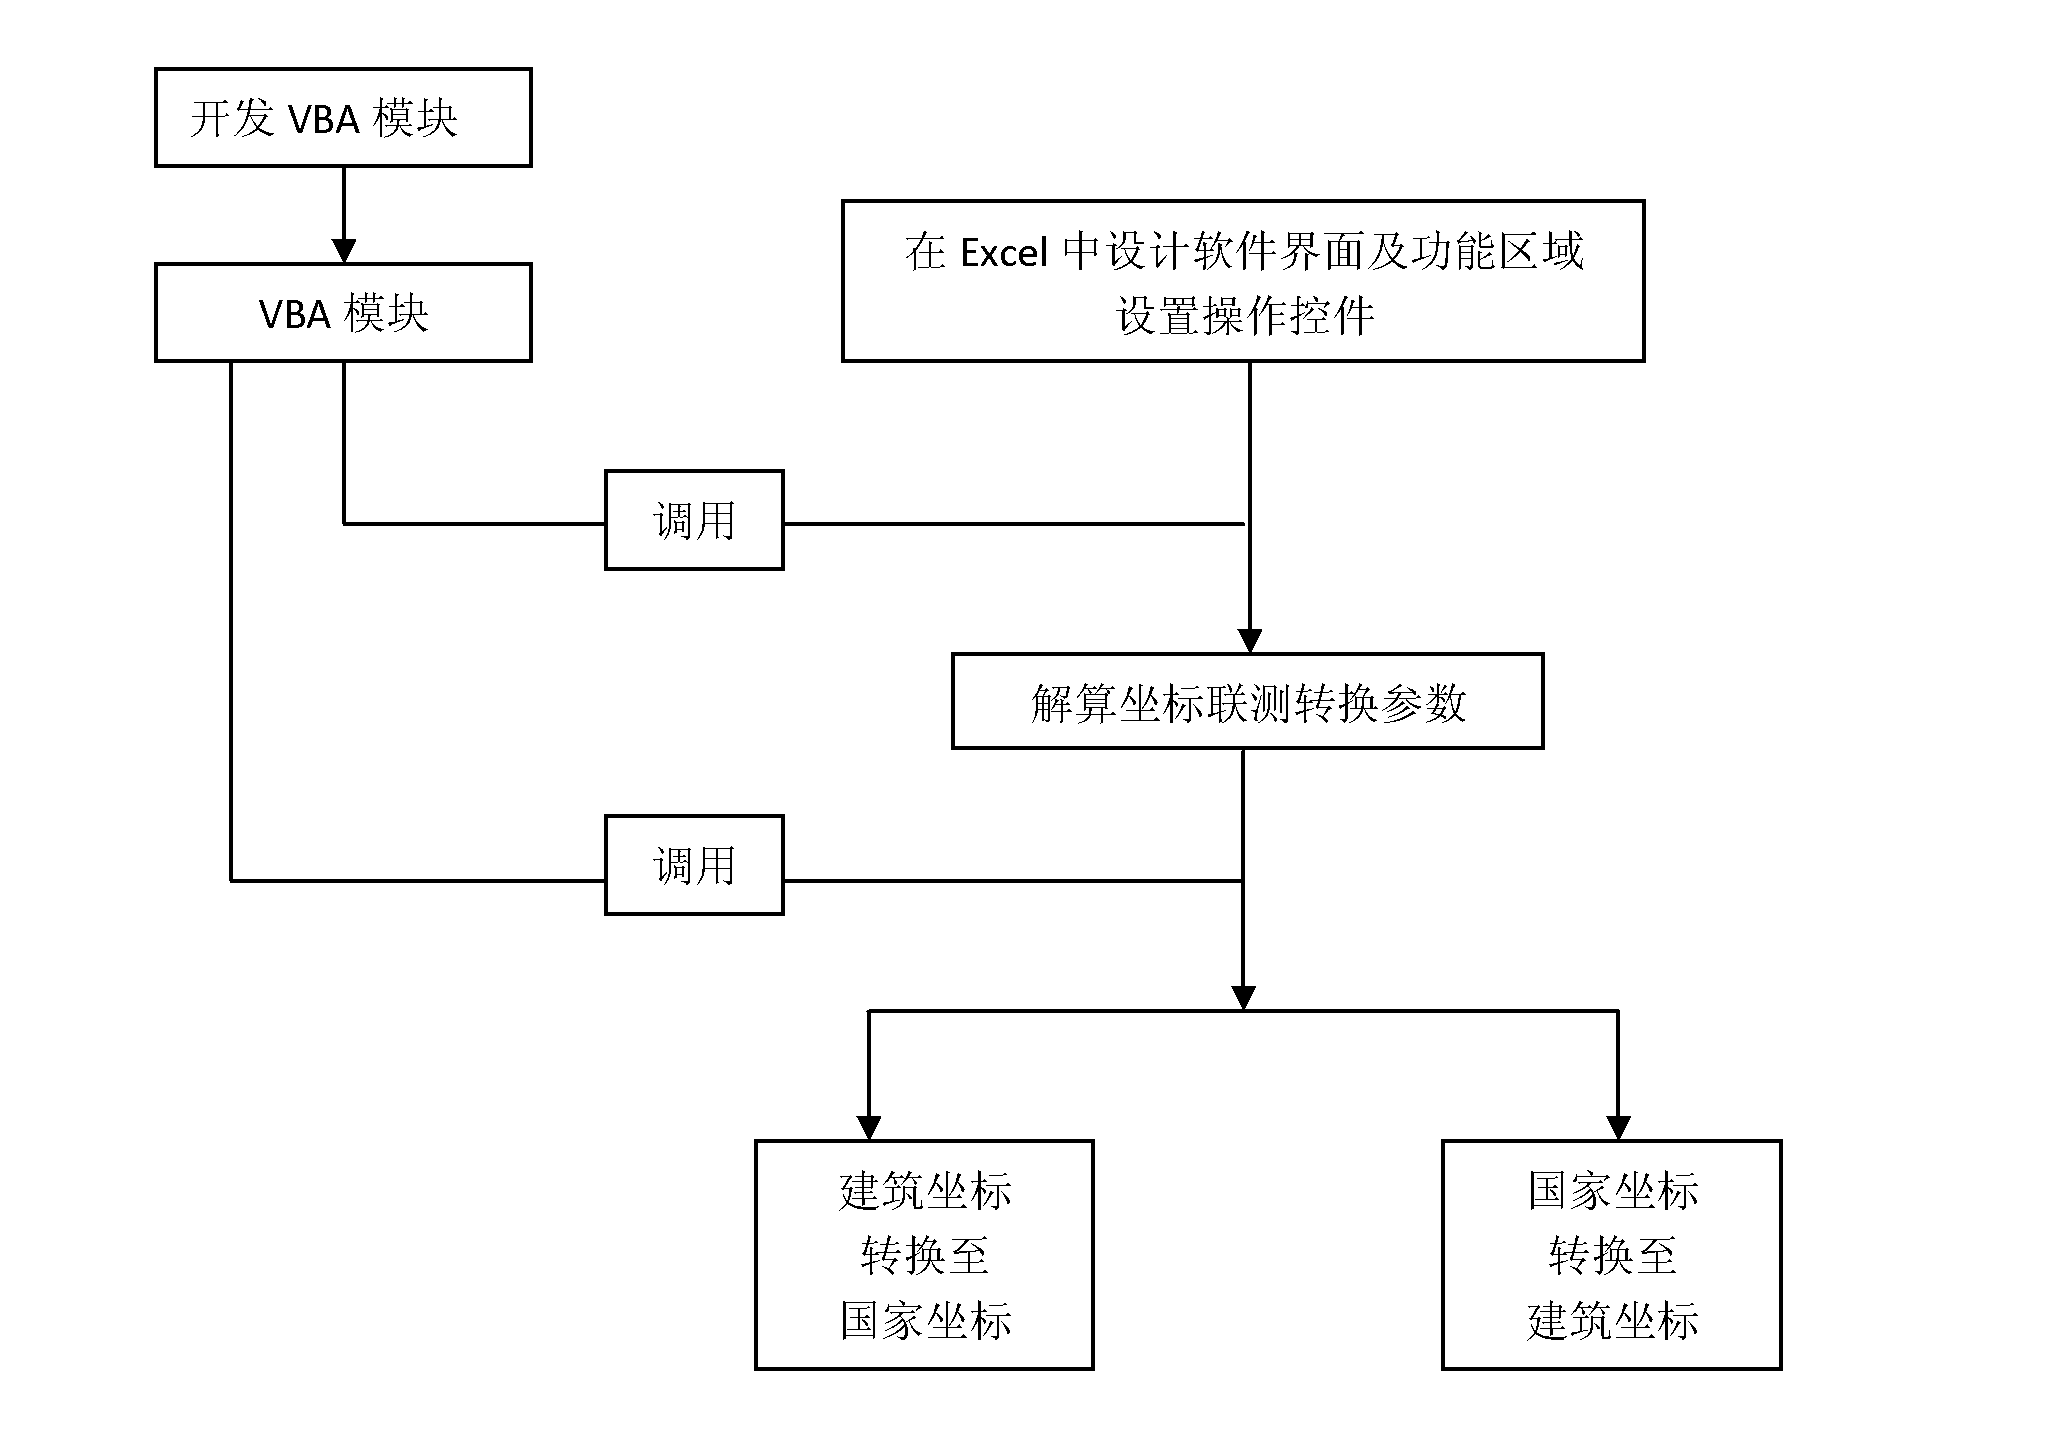 Method for performing power engineering coordinate combined survey computation in Excel by using VBA (Visual Basic for Applications) module